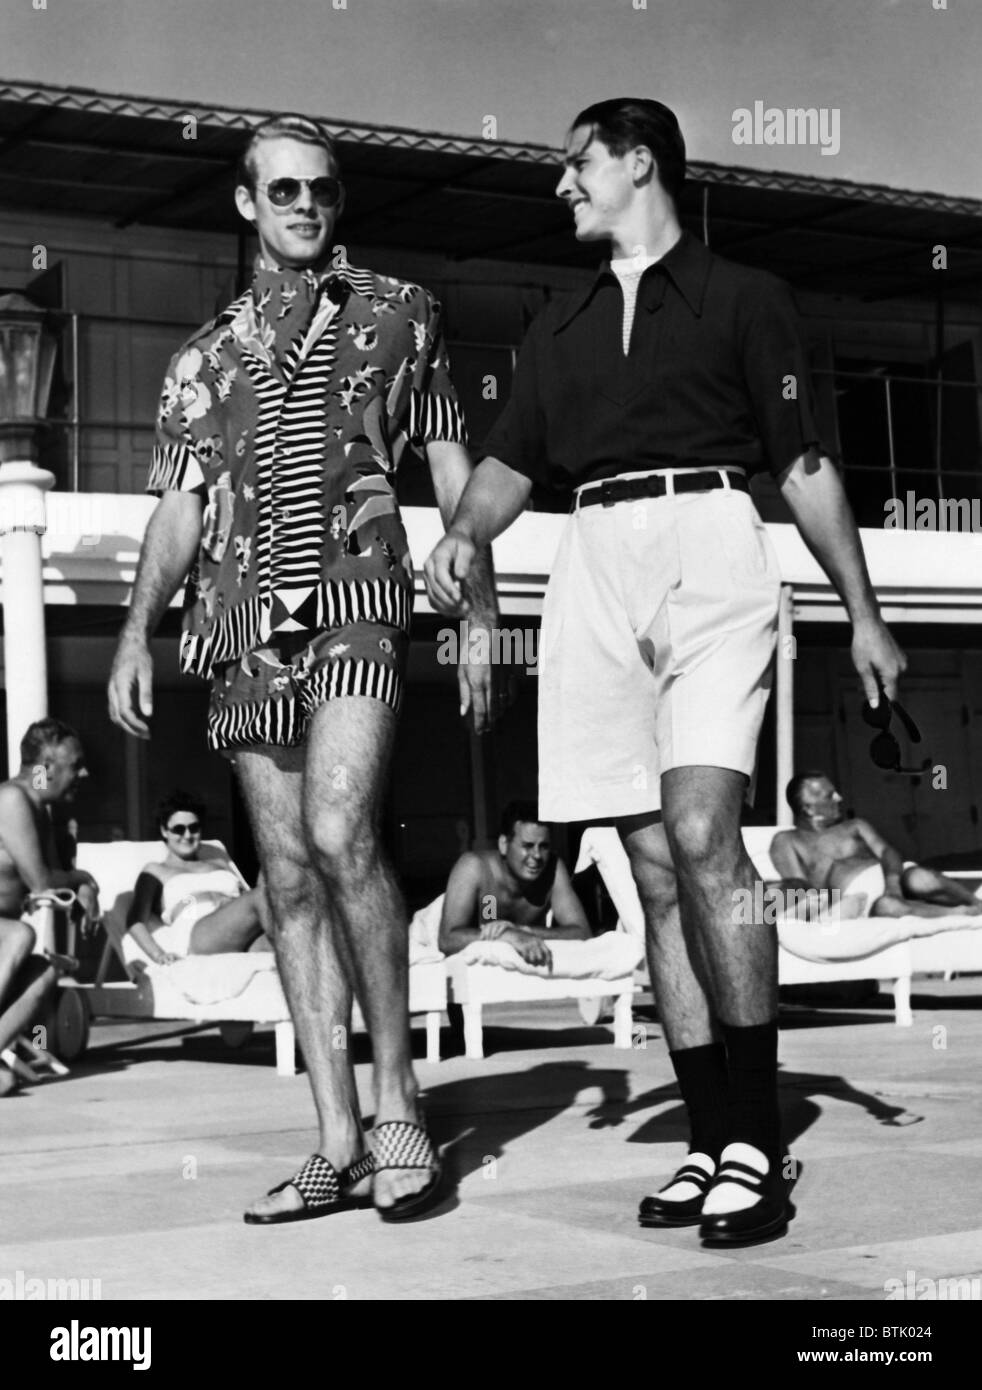 Men wearing the latest beach fashions. On the left, a colorful Mexican design; on the right, longer shorts and an open collar sh Stock Photo